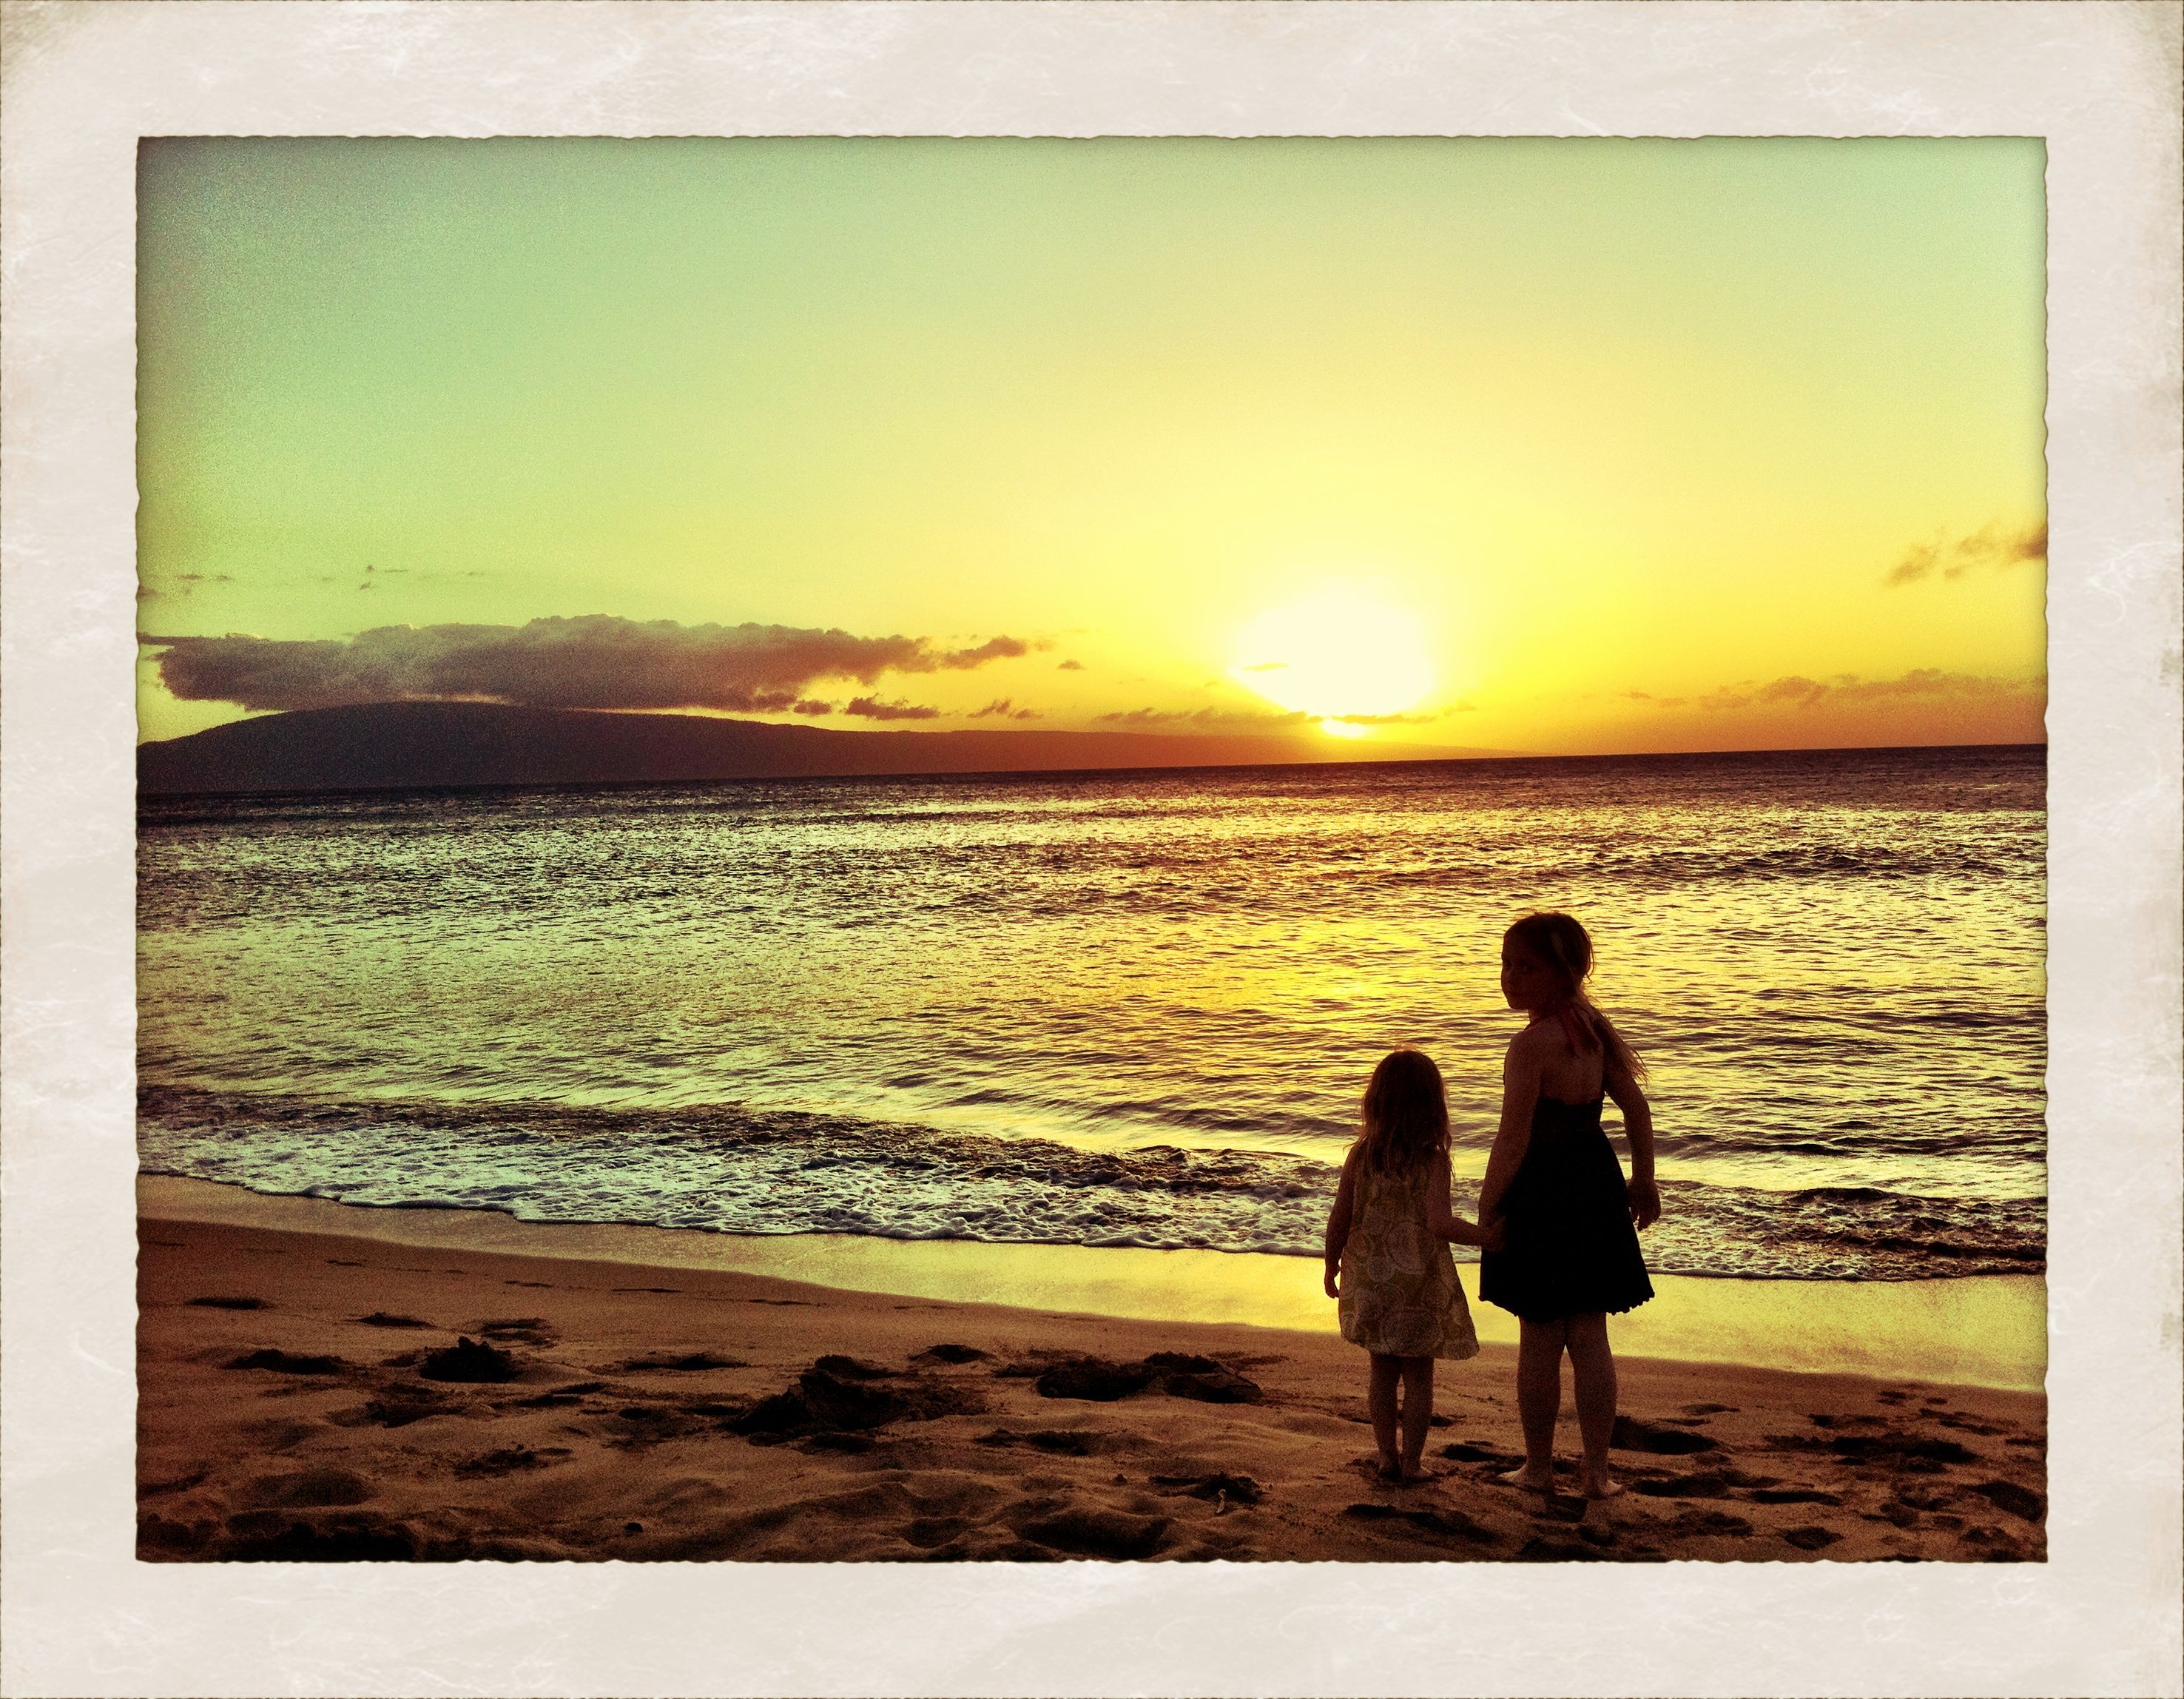 Maui rental or hotel? Honua Kai Resort Delivers Best of Both for Families